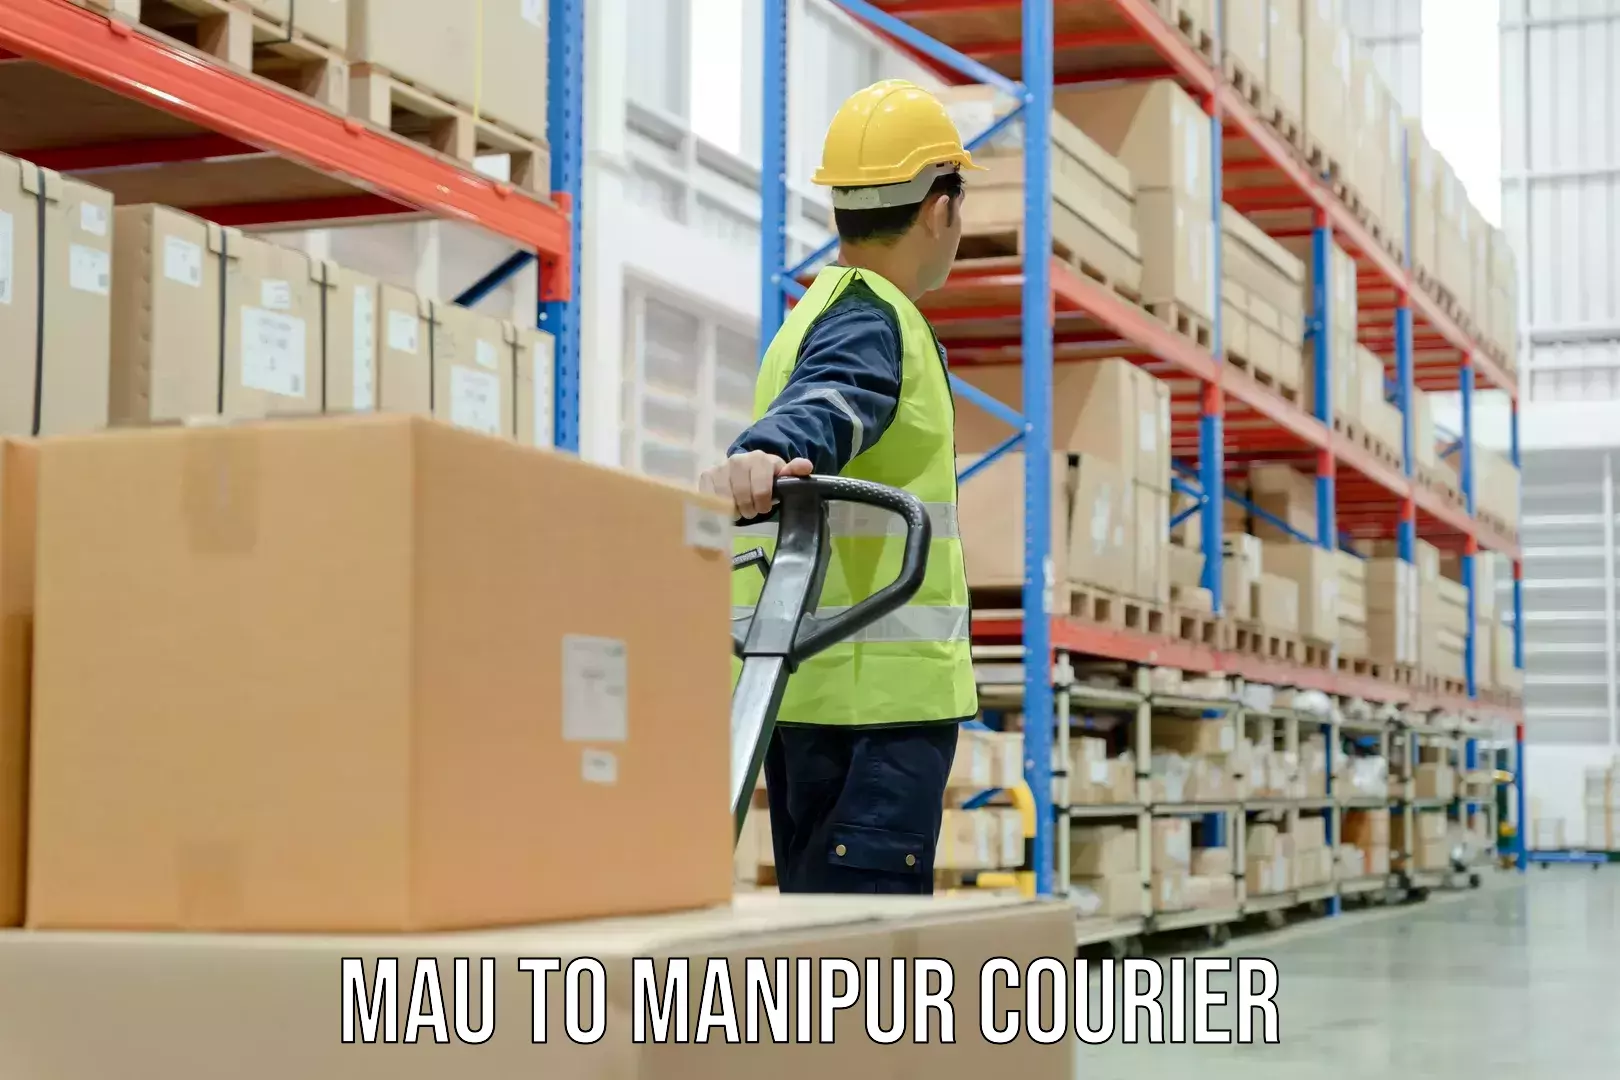 High-capacity parcel service Mau to Manipur